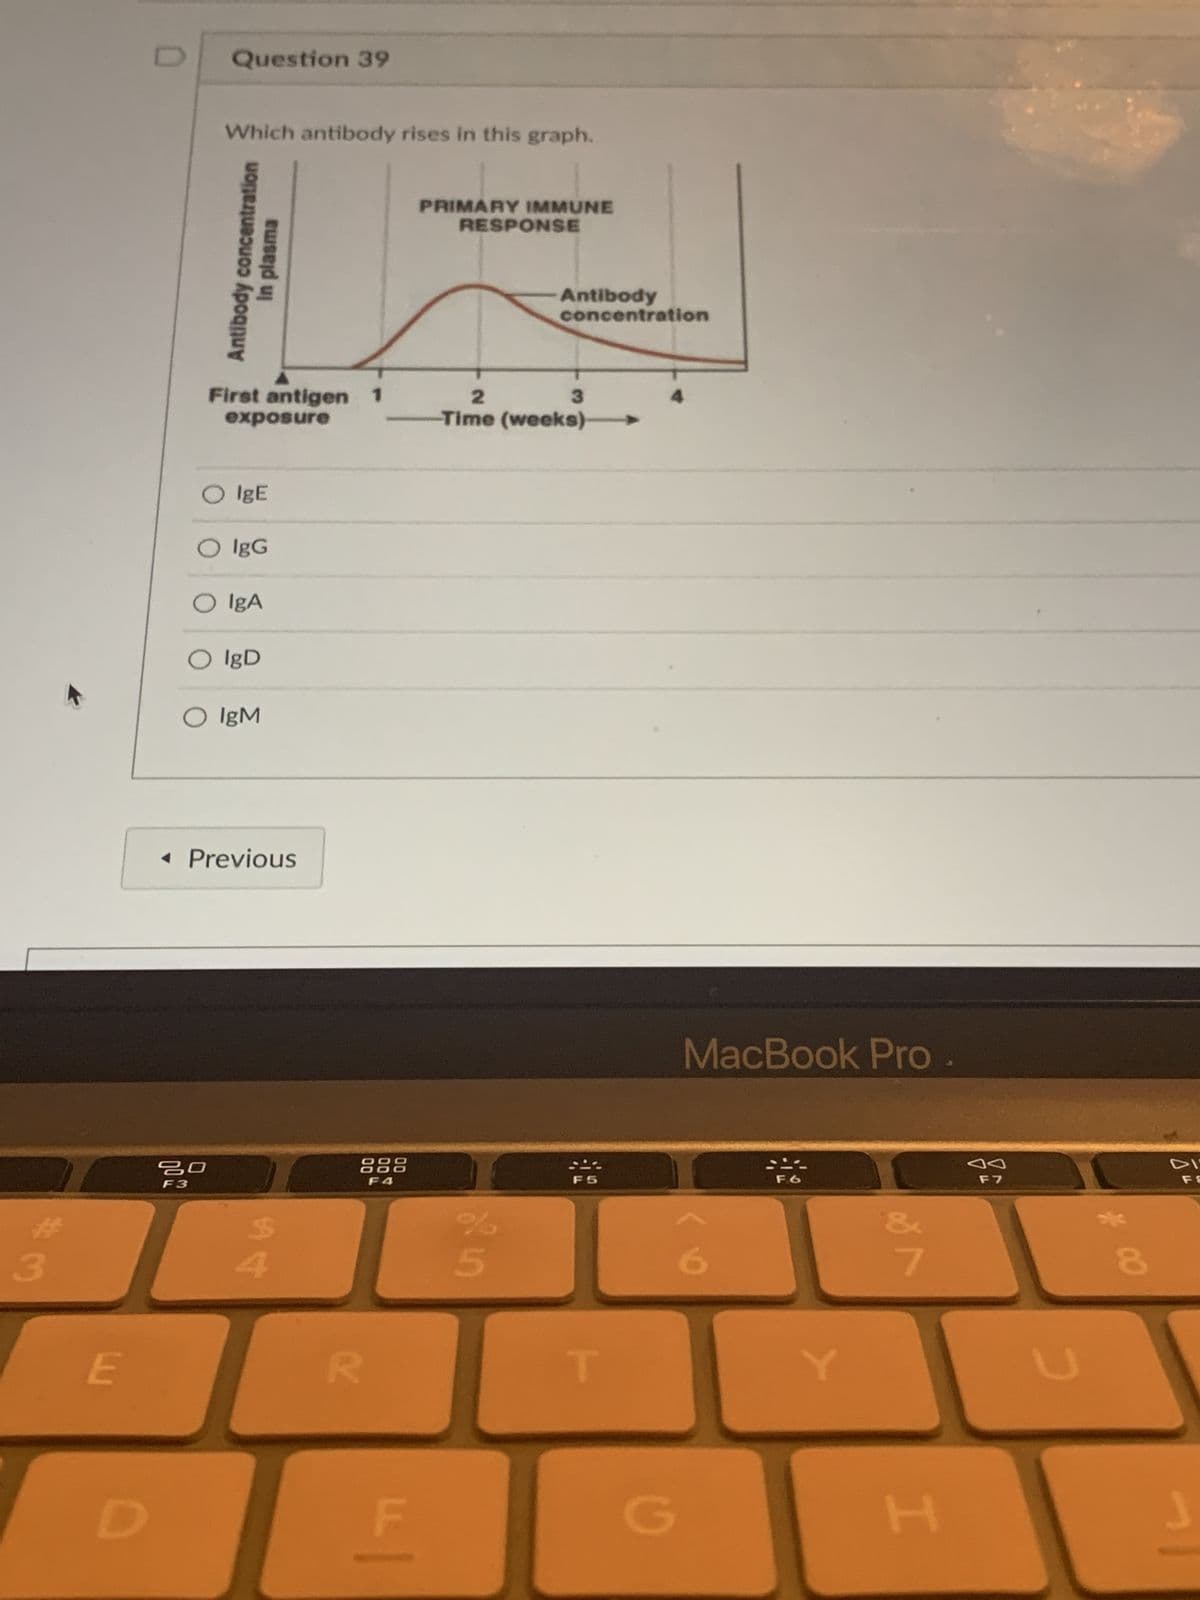 3
E
D
0
Question 39
Which antibody rises in this graph.
concentration
In plasma
Antibody
First antigen 1
exposure
O IgE
O lgG
80
F3
O IgA
O lgD
O IgM
◄ Previous
$
888
F4
20
F
PRIMARY IMMUNE
RESPONSE
Antibody
concentration
2
3
Time (weeks)
%
5
G
MacBook Pro
7
H
F7
8
J